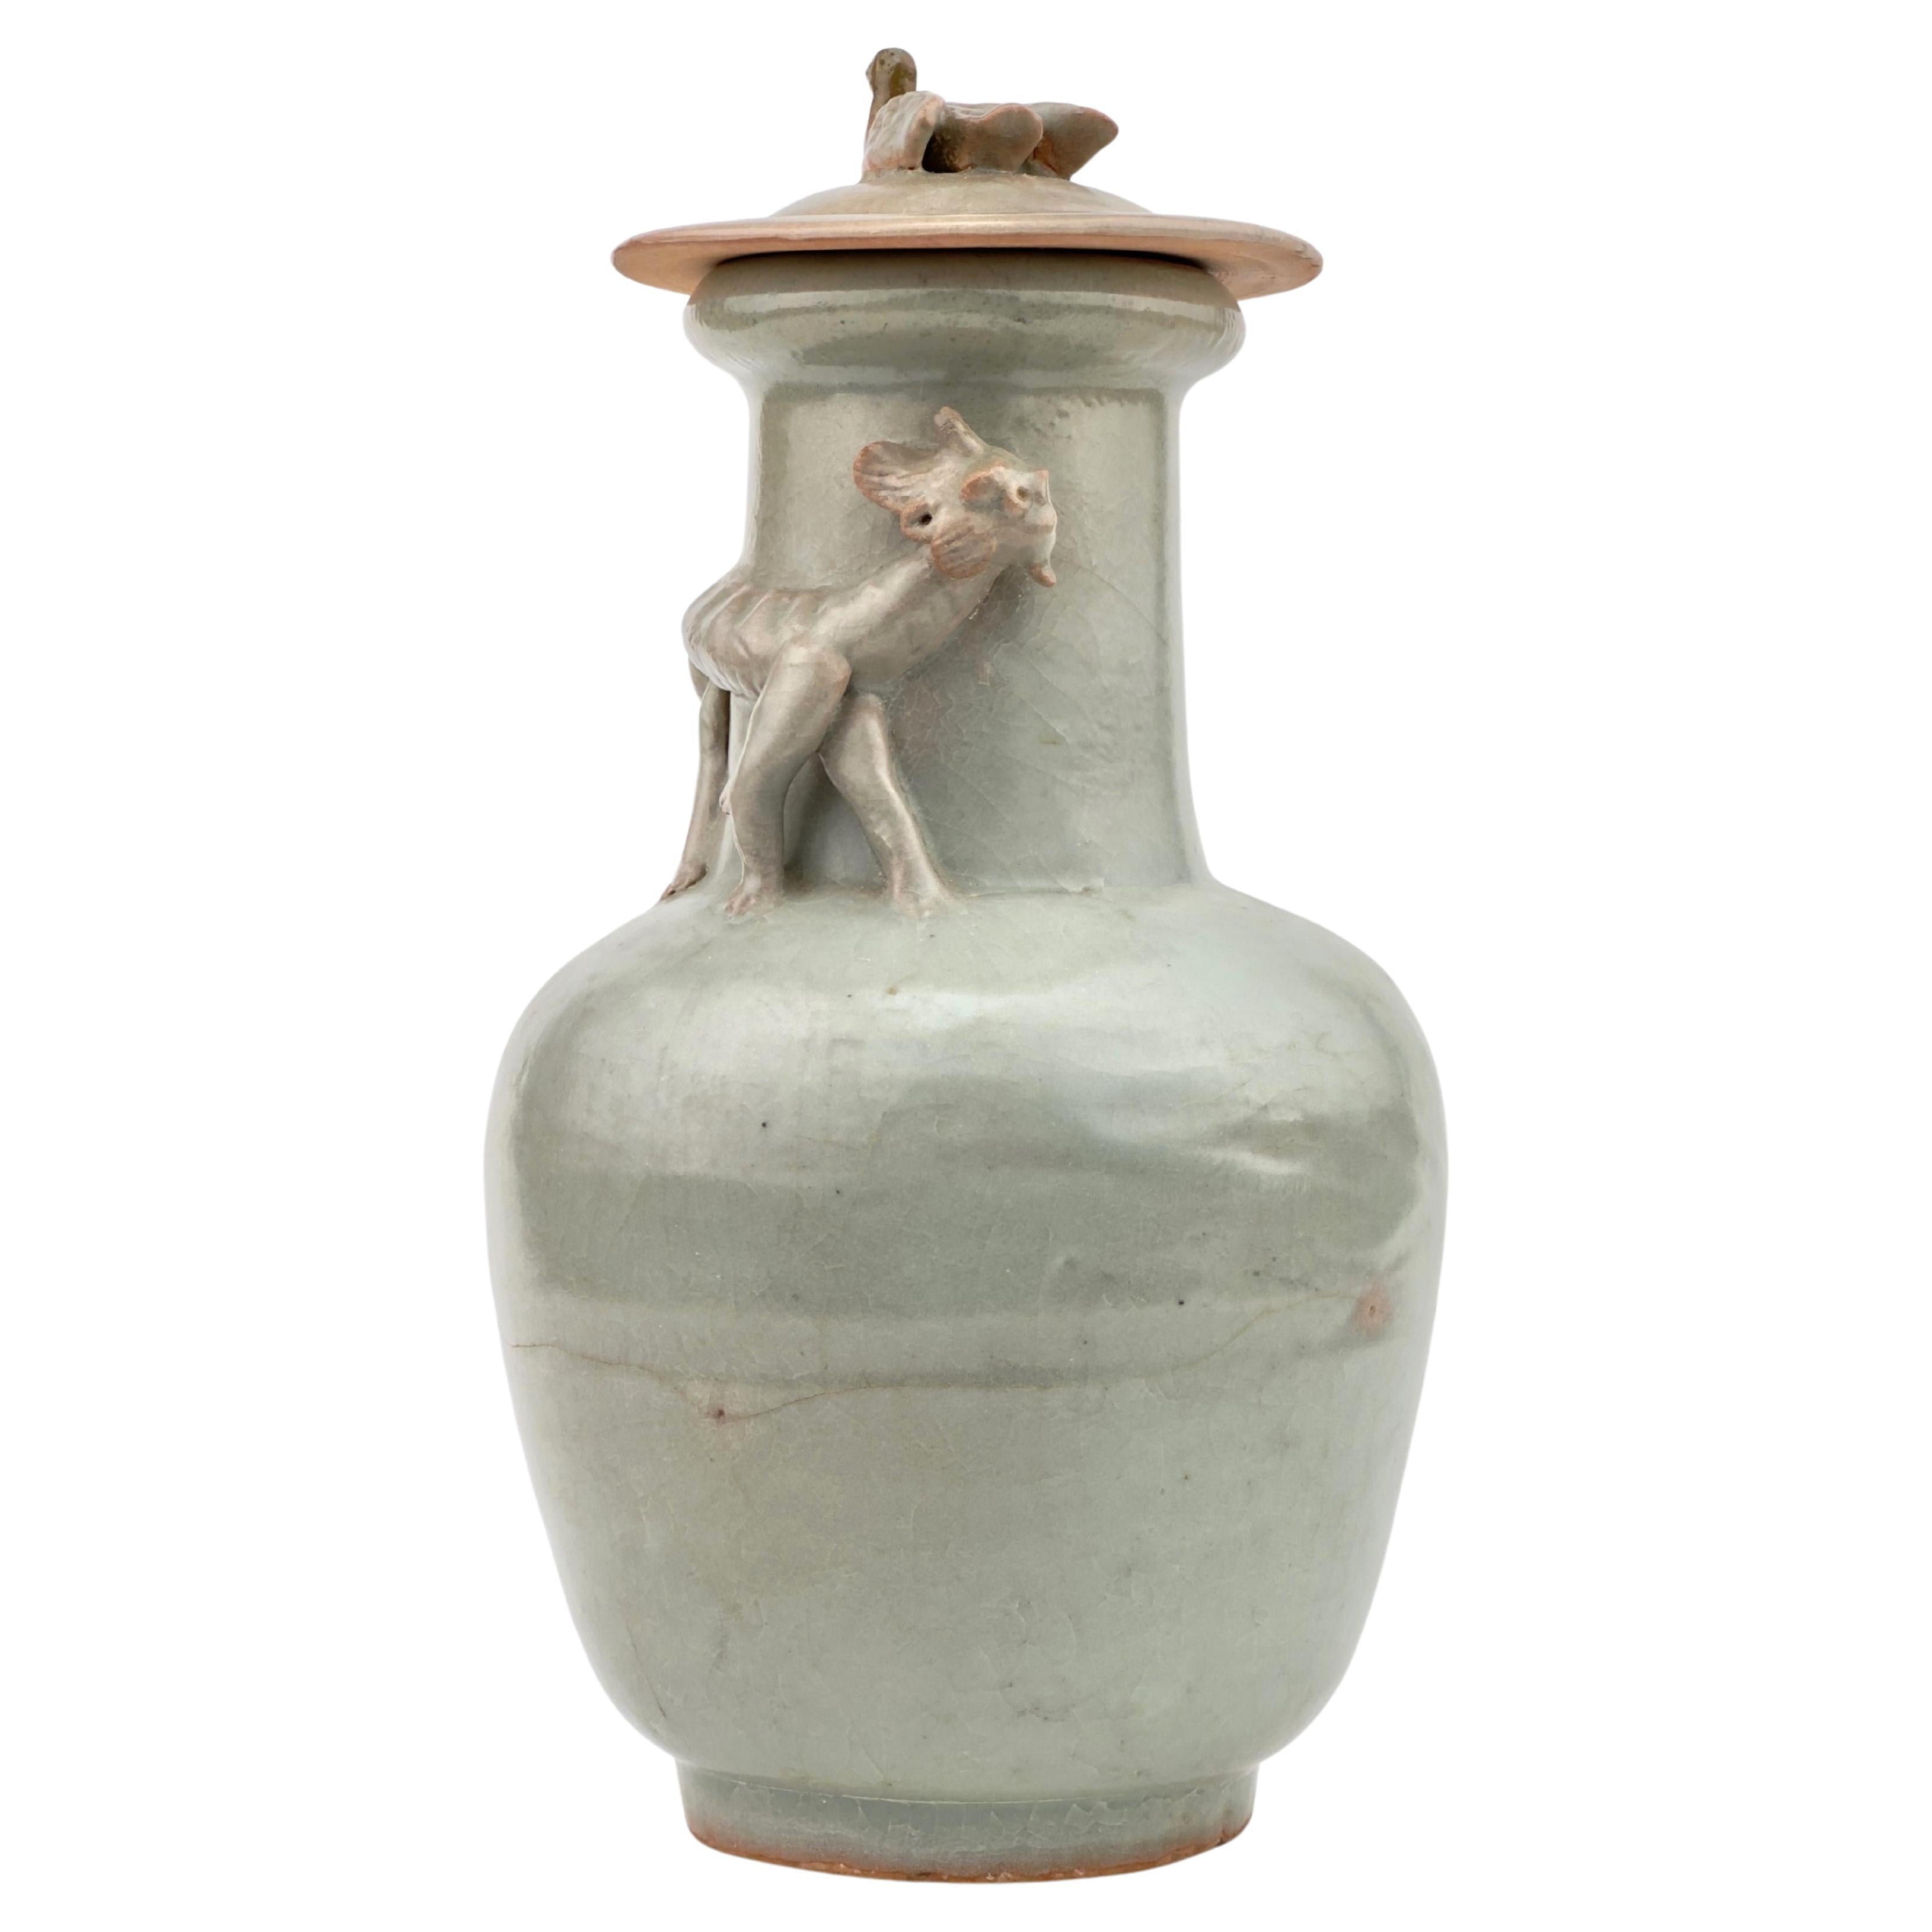 Longquan Celadon 'Dragon' Jar and Cover, Song Dynasty(1127–1279)